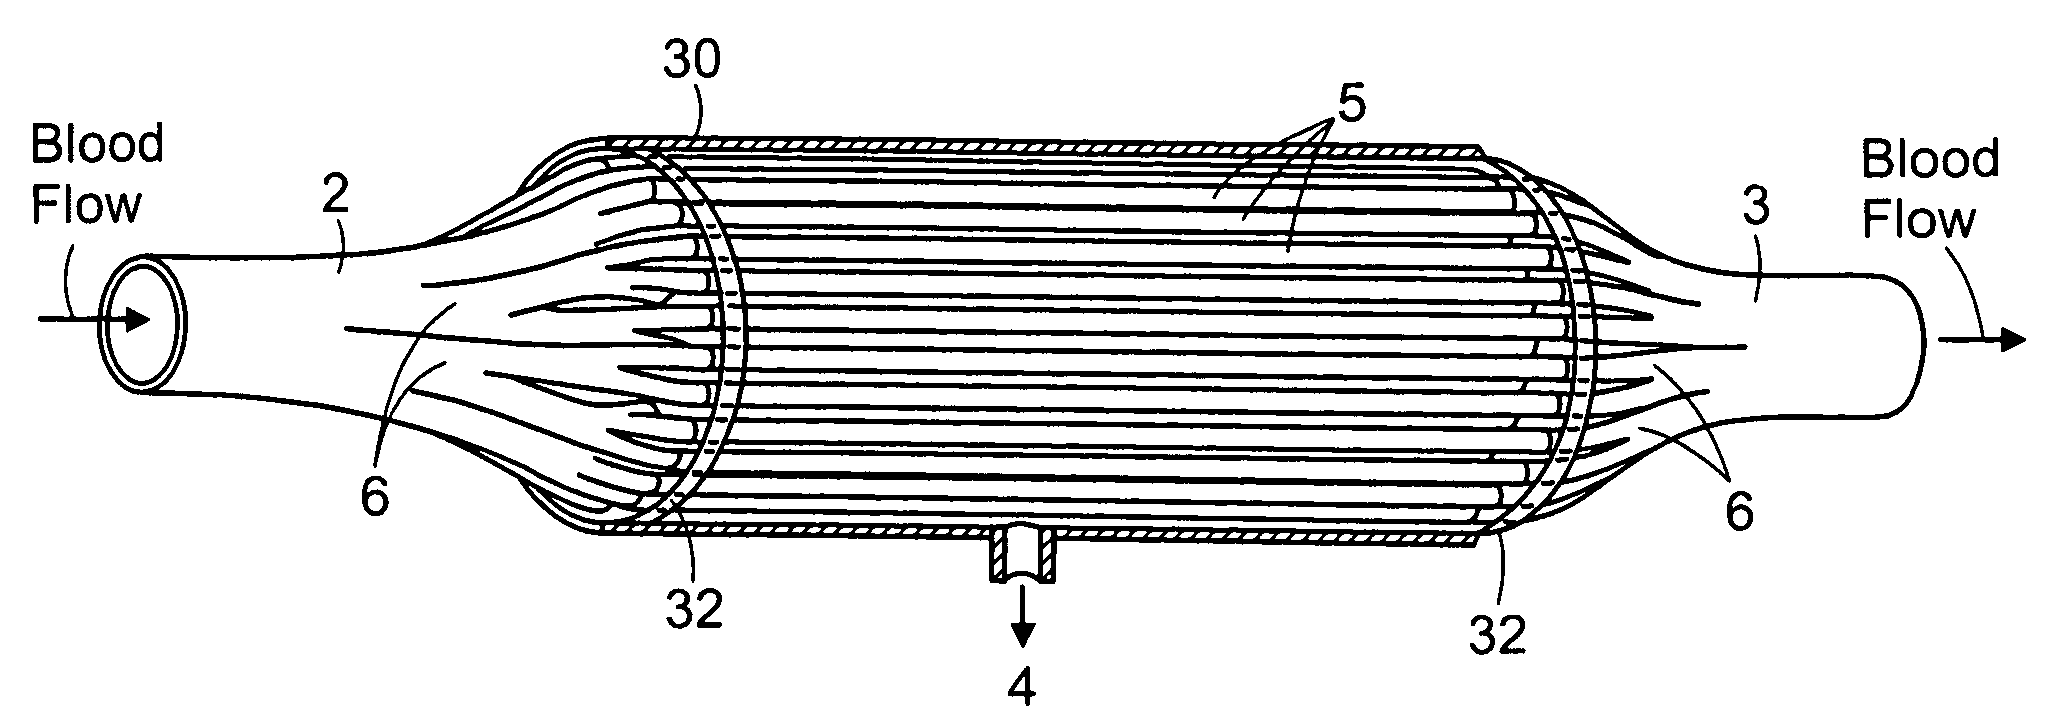 Device for removing fluid from blood in a patient